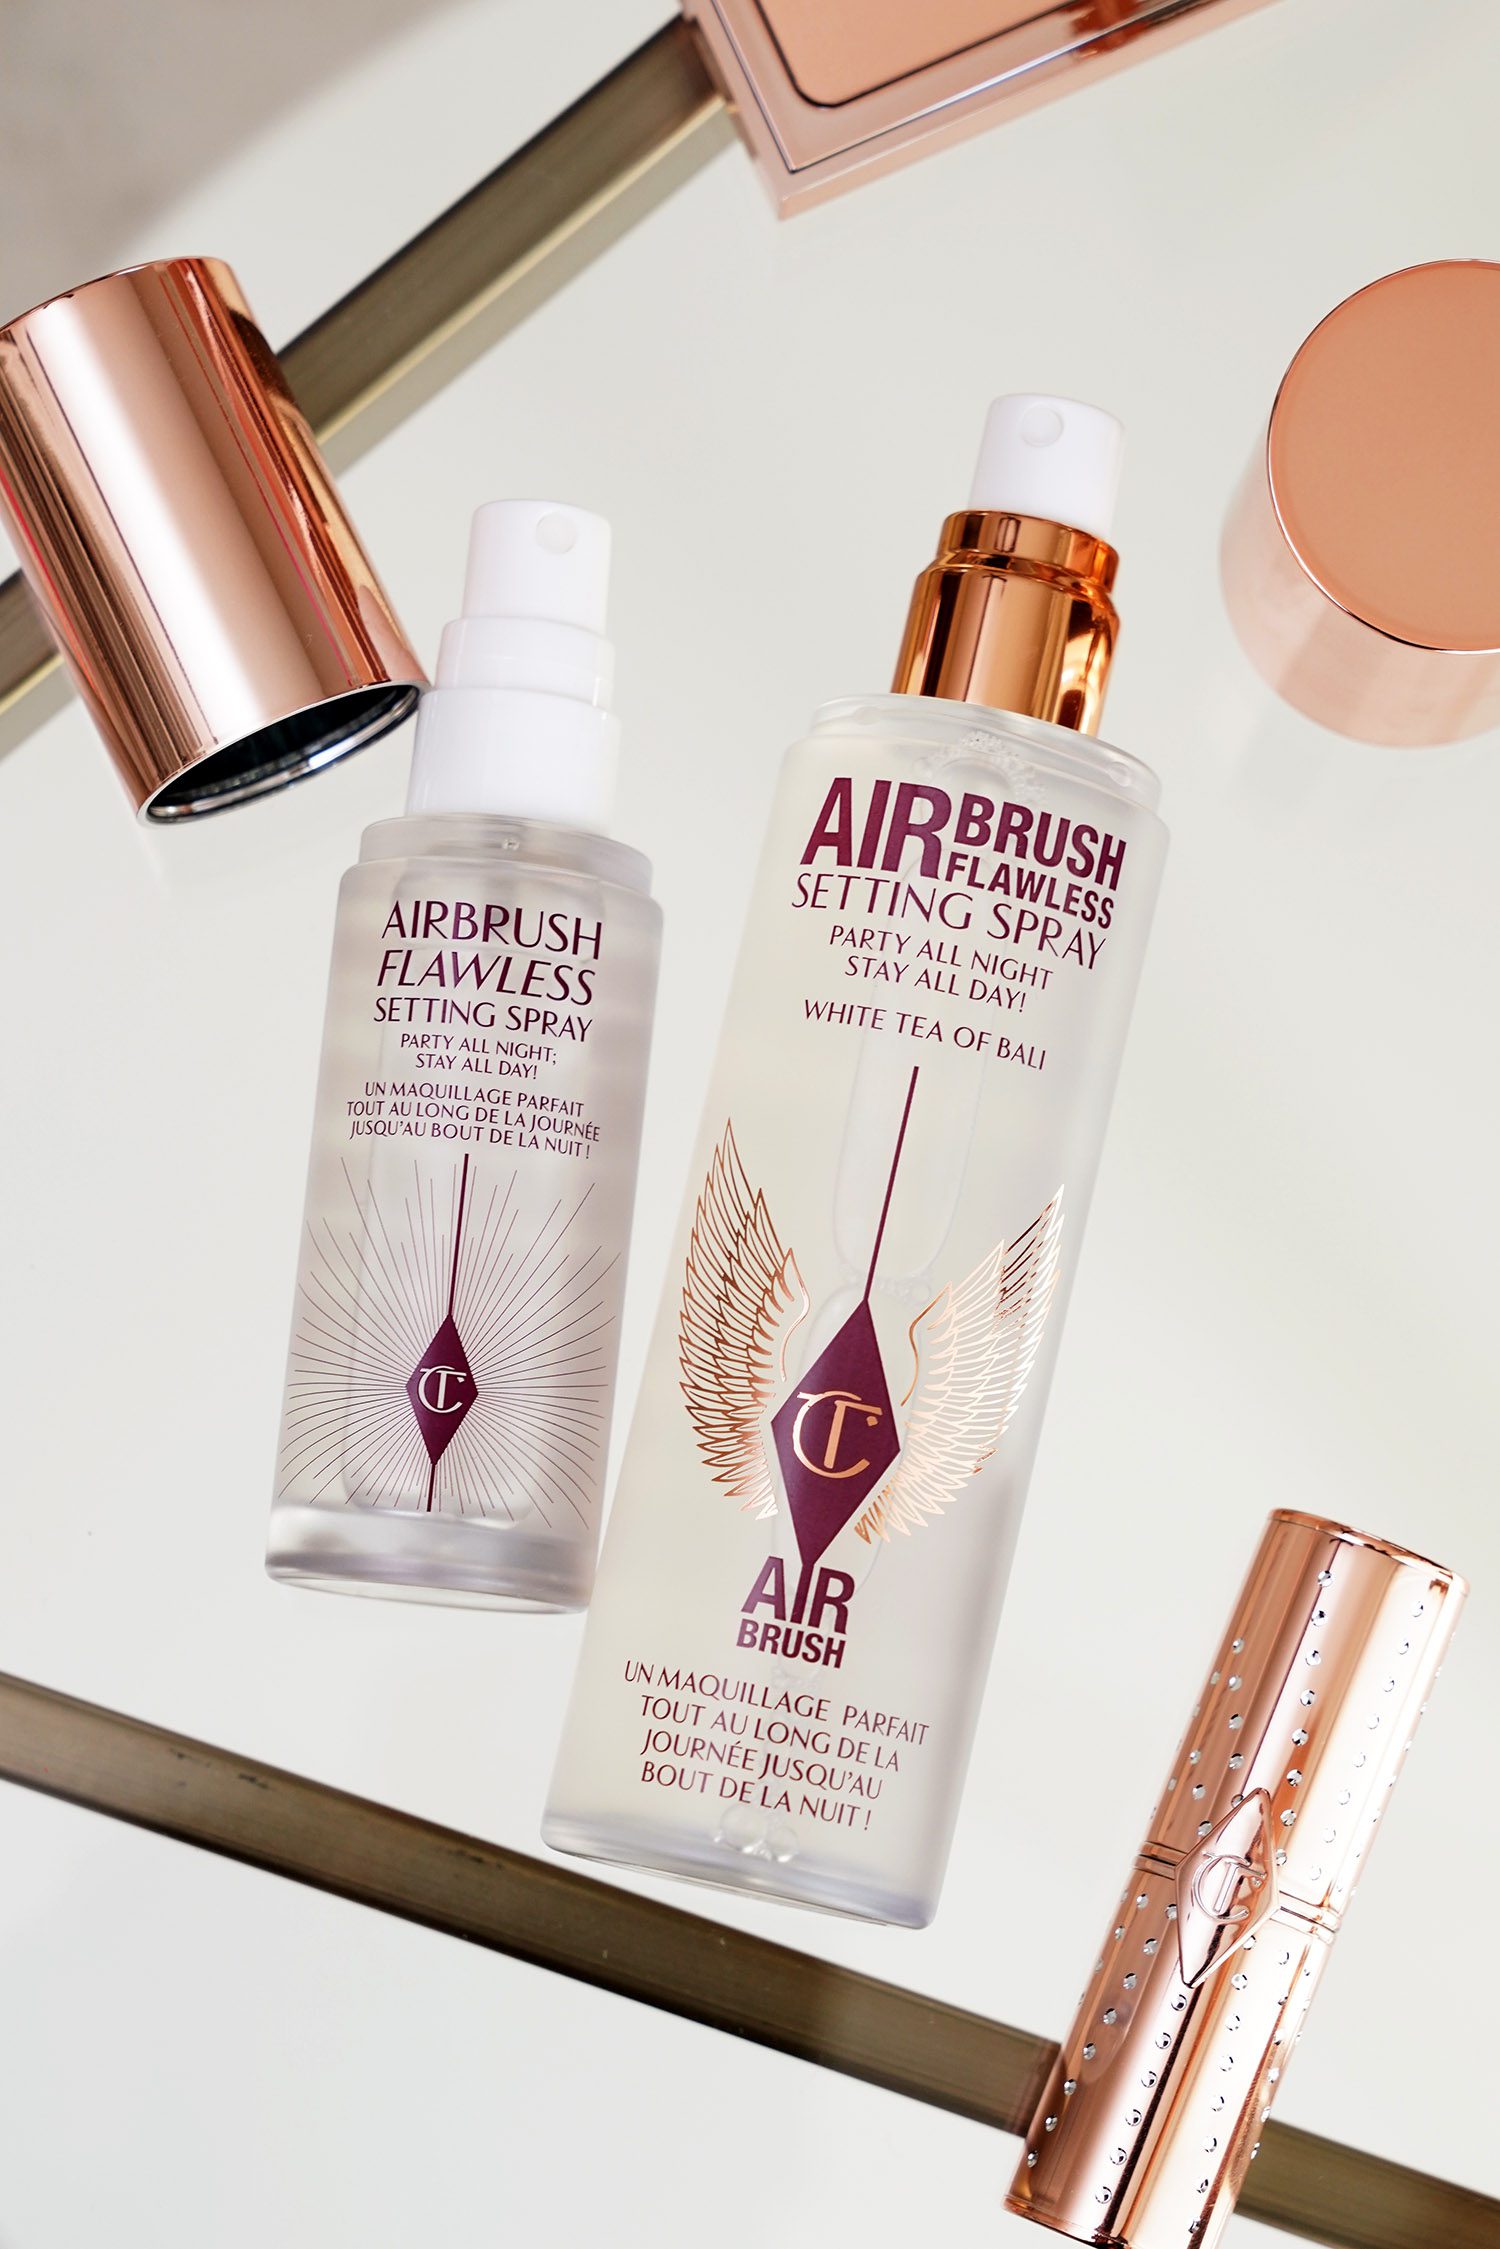 Charlotte Tilbury launches new Airbrush Flawless Setting spray